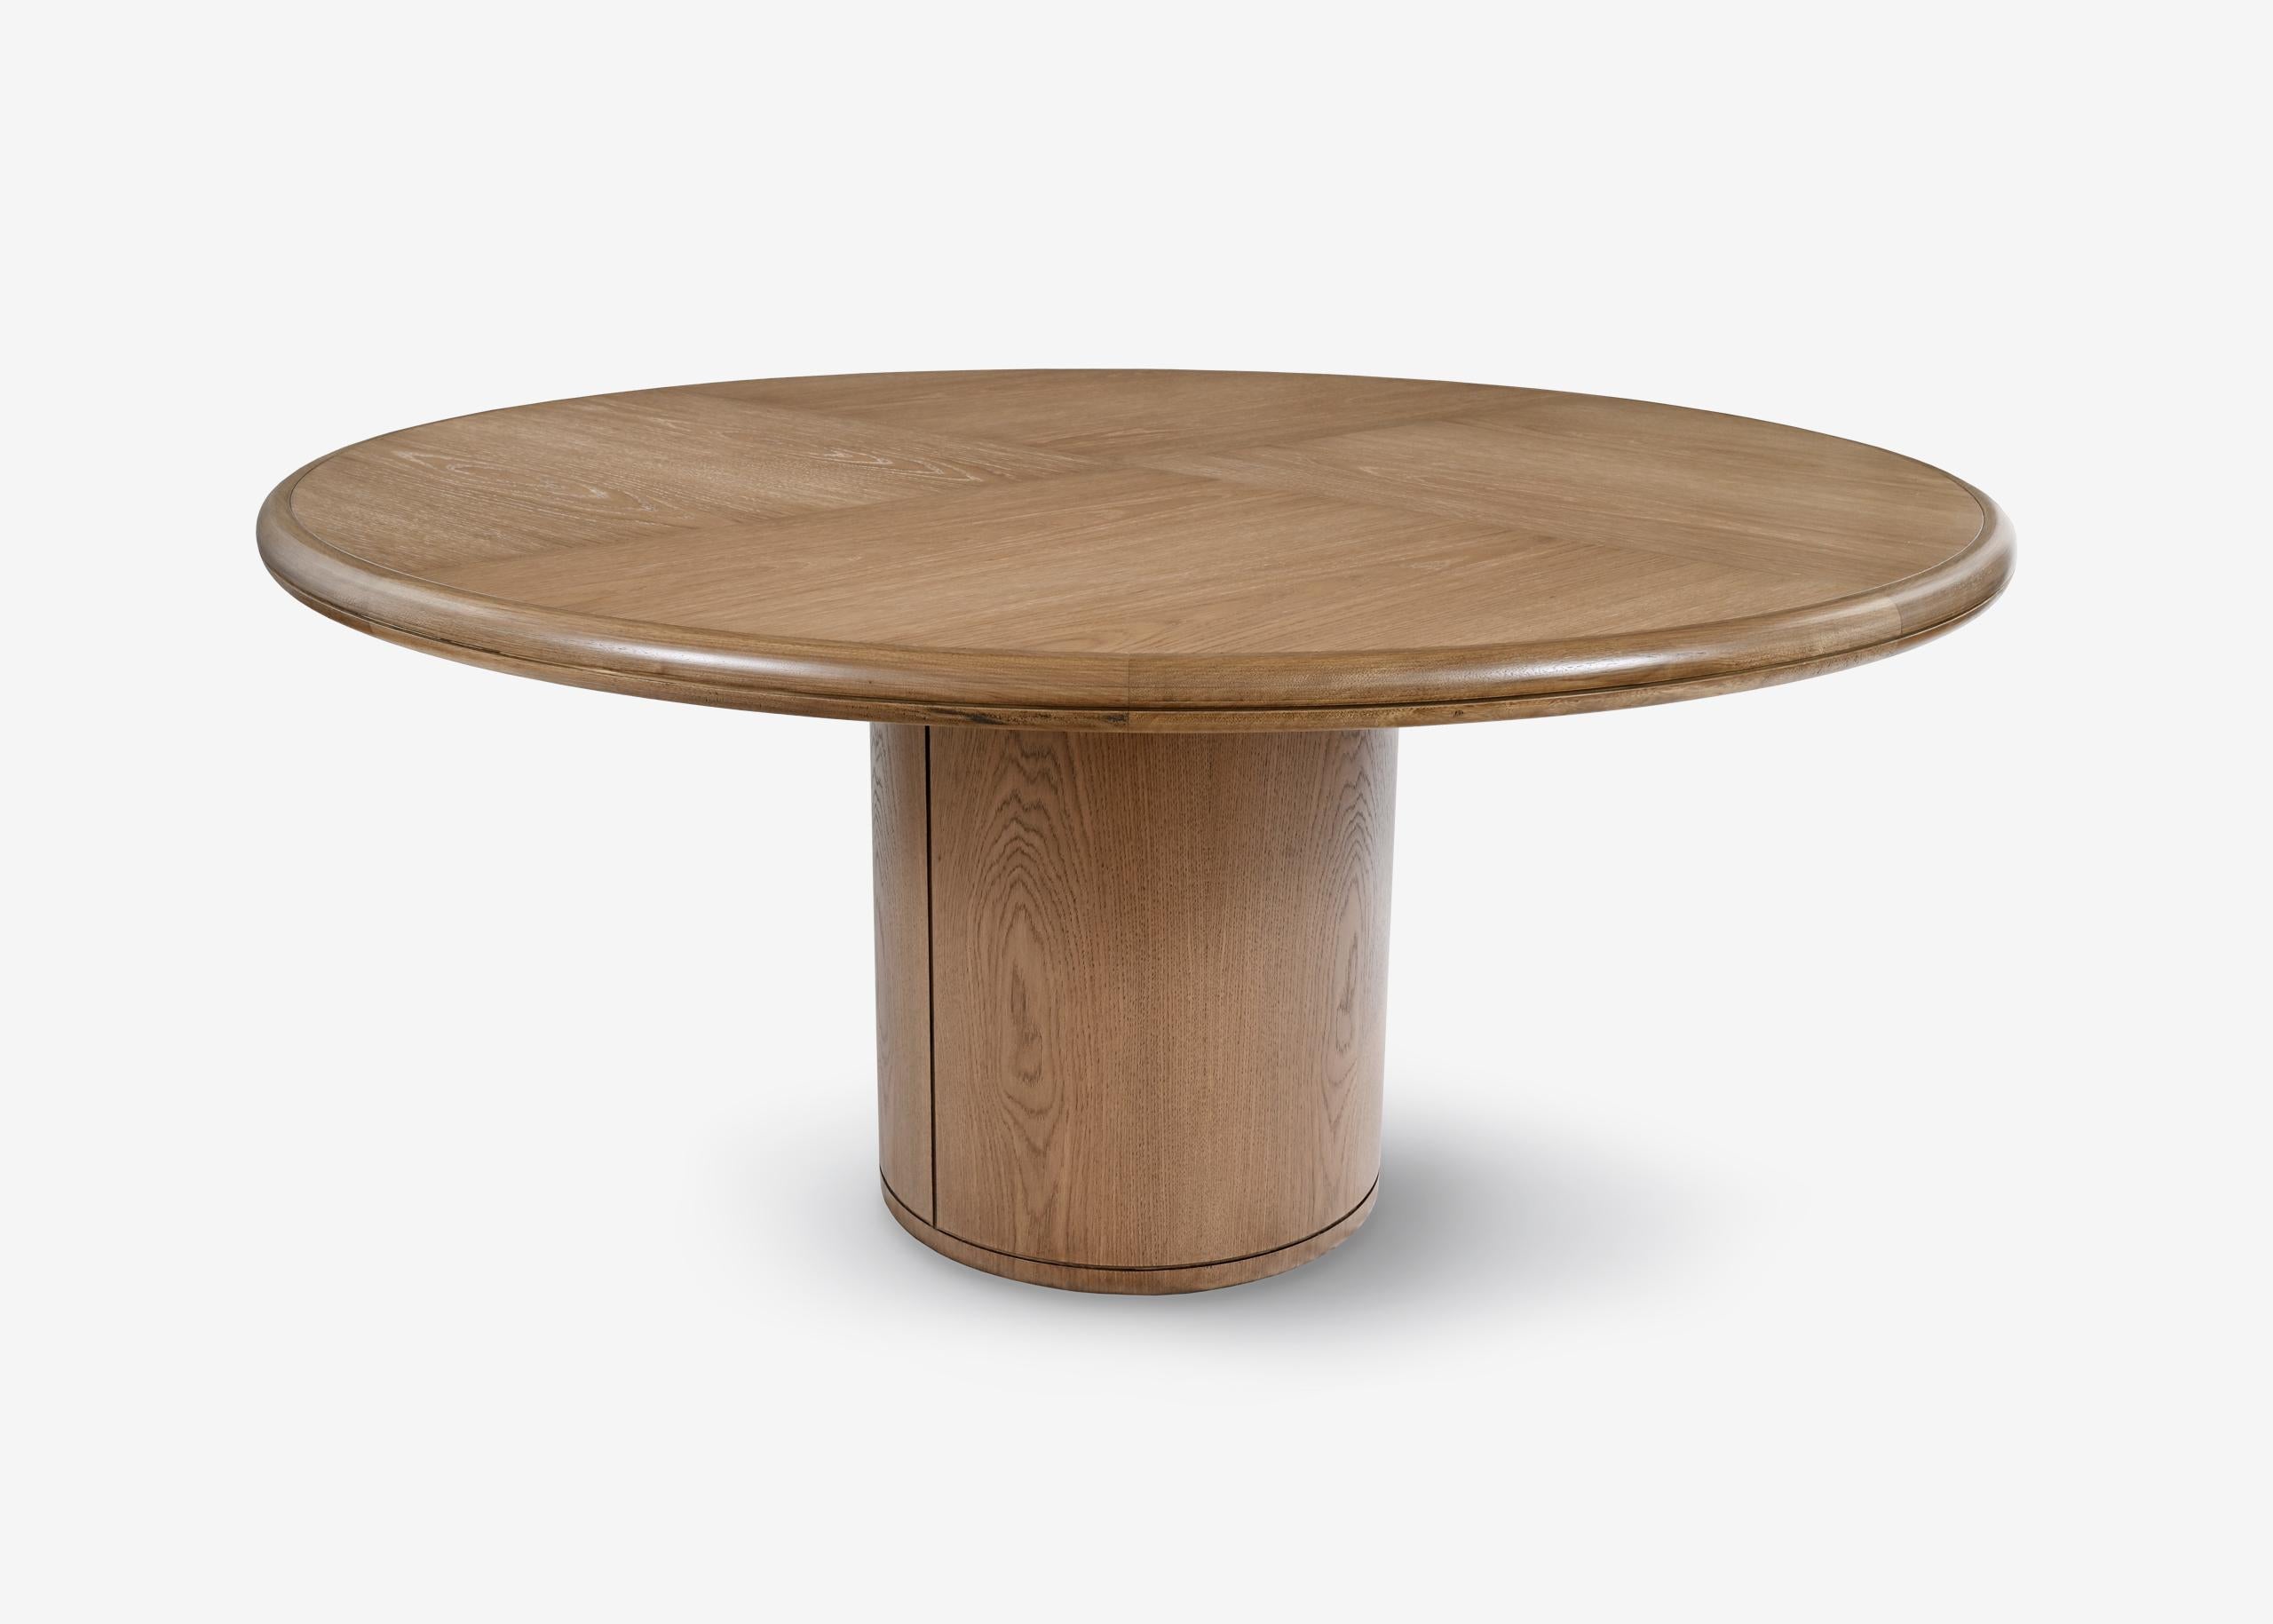 MOON
Natural brushed oak, round dining table.
Available in different dimensions.

Designed by Buket Hoscan Bazman